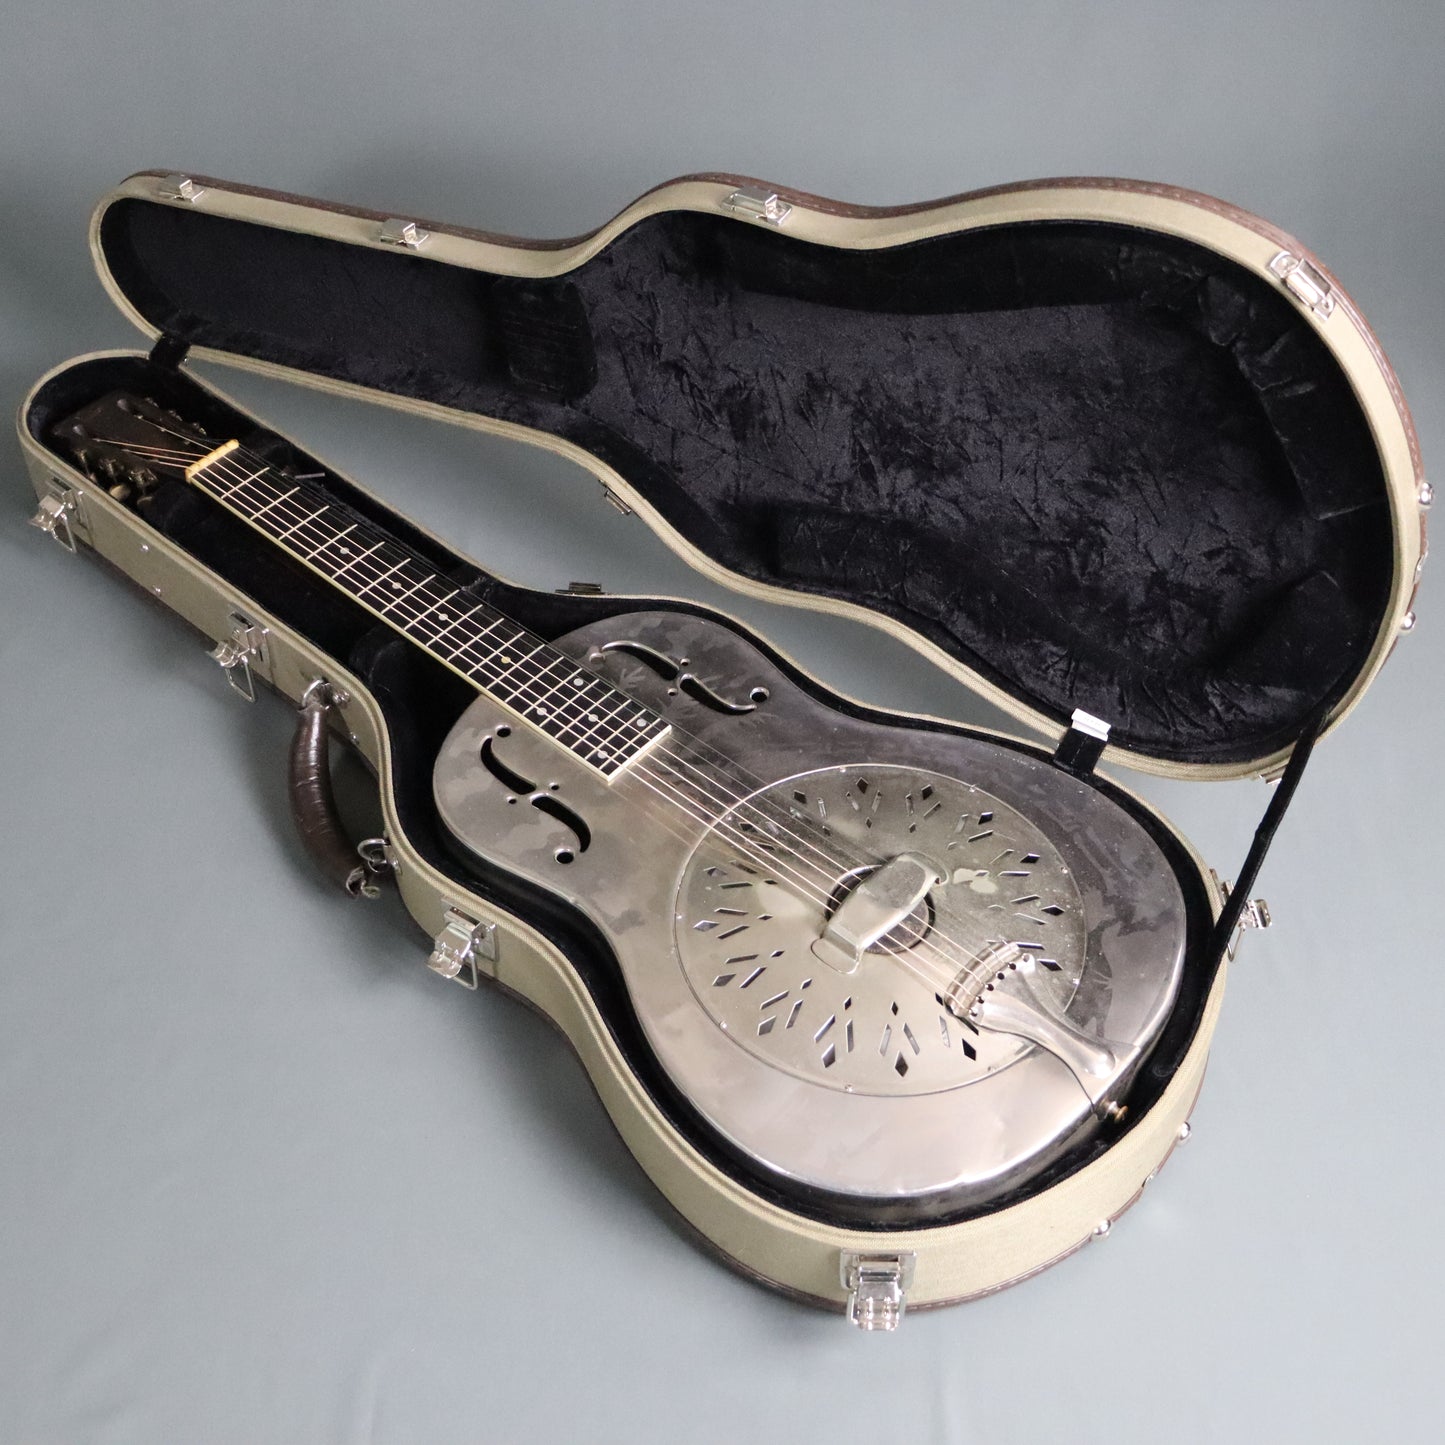 1933 National Style O Square Neck Lap Steel Resonator Guitar